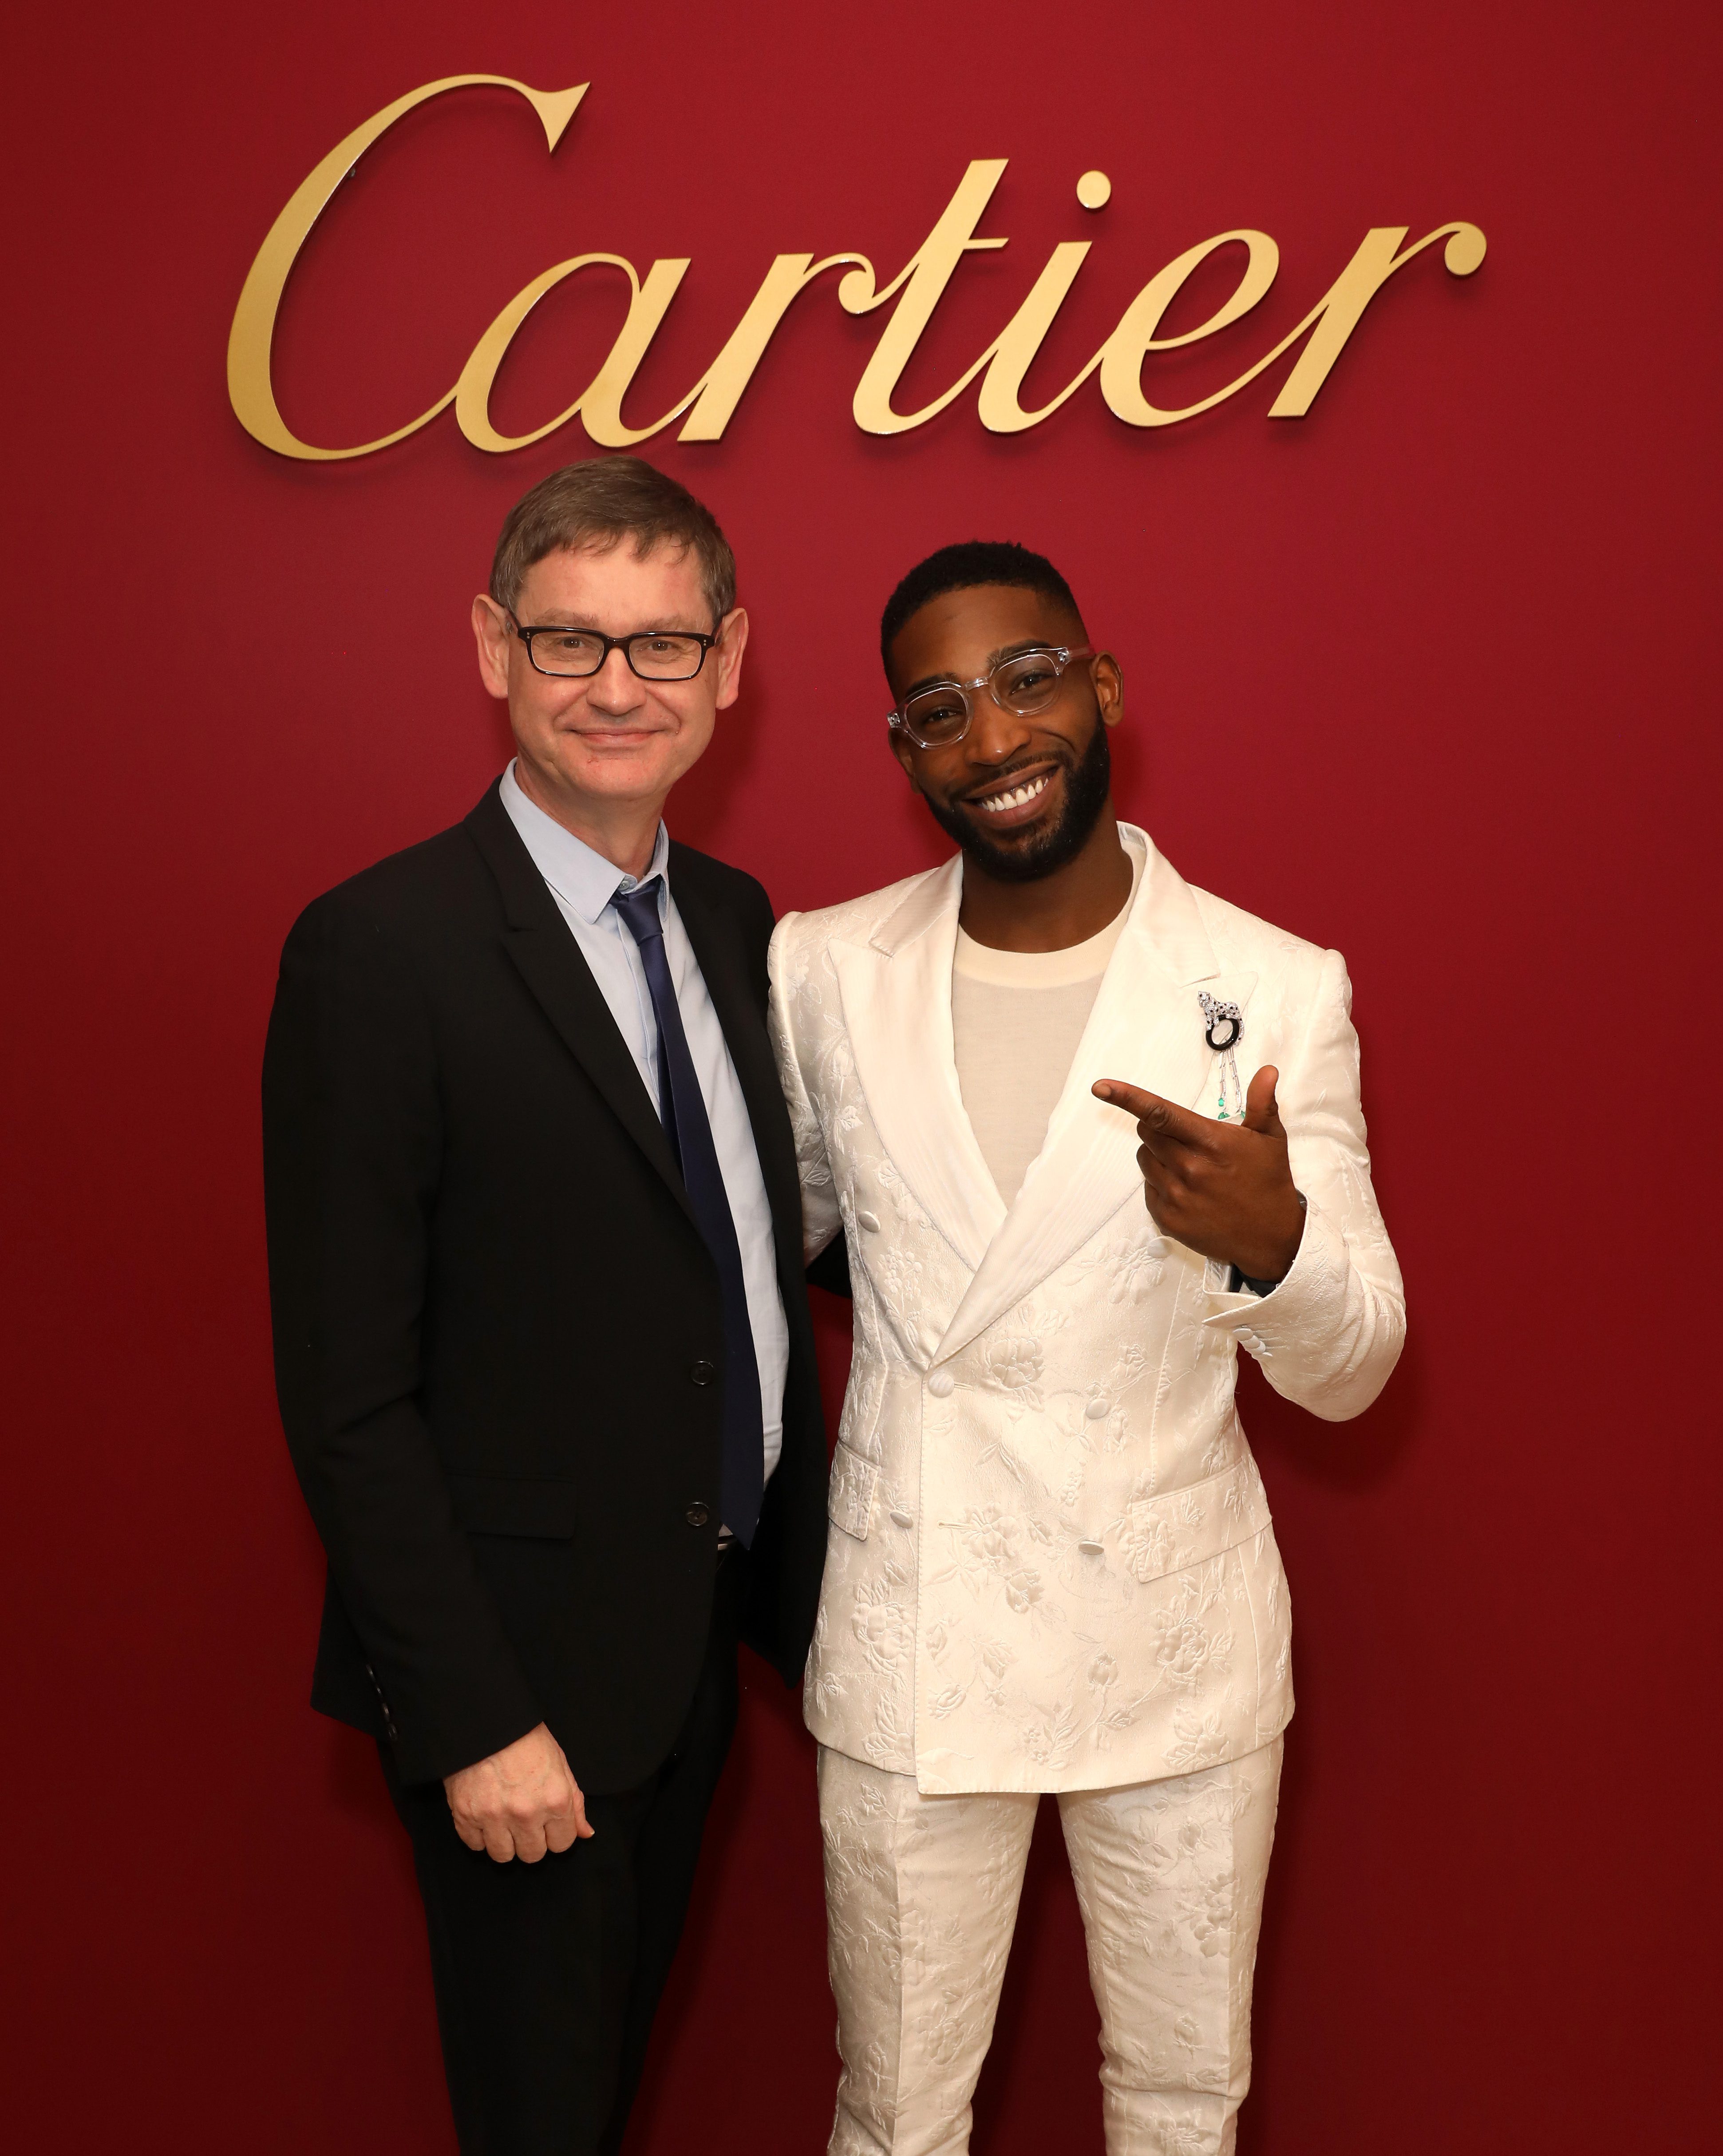 Cartier Reopens Harrods Boutique with New Bespoke Concept, Latest Jewelry  News, by The Jewelry Magazine TJM